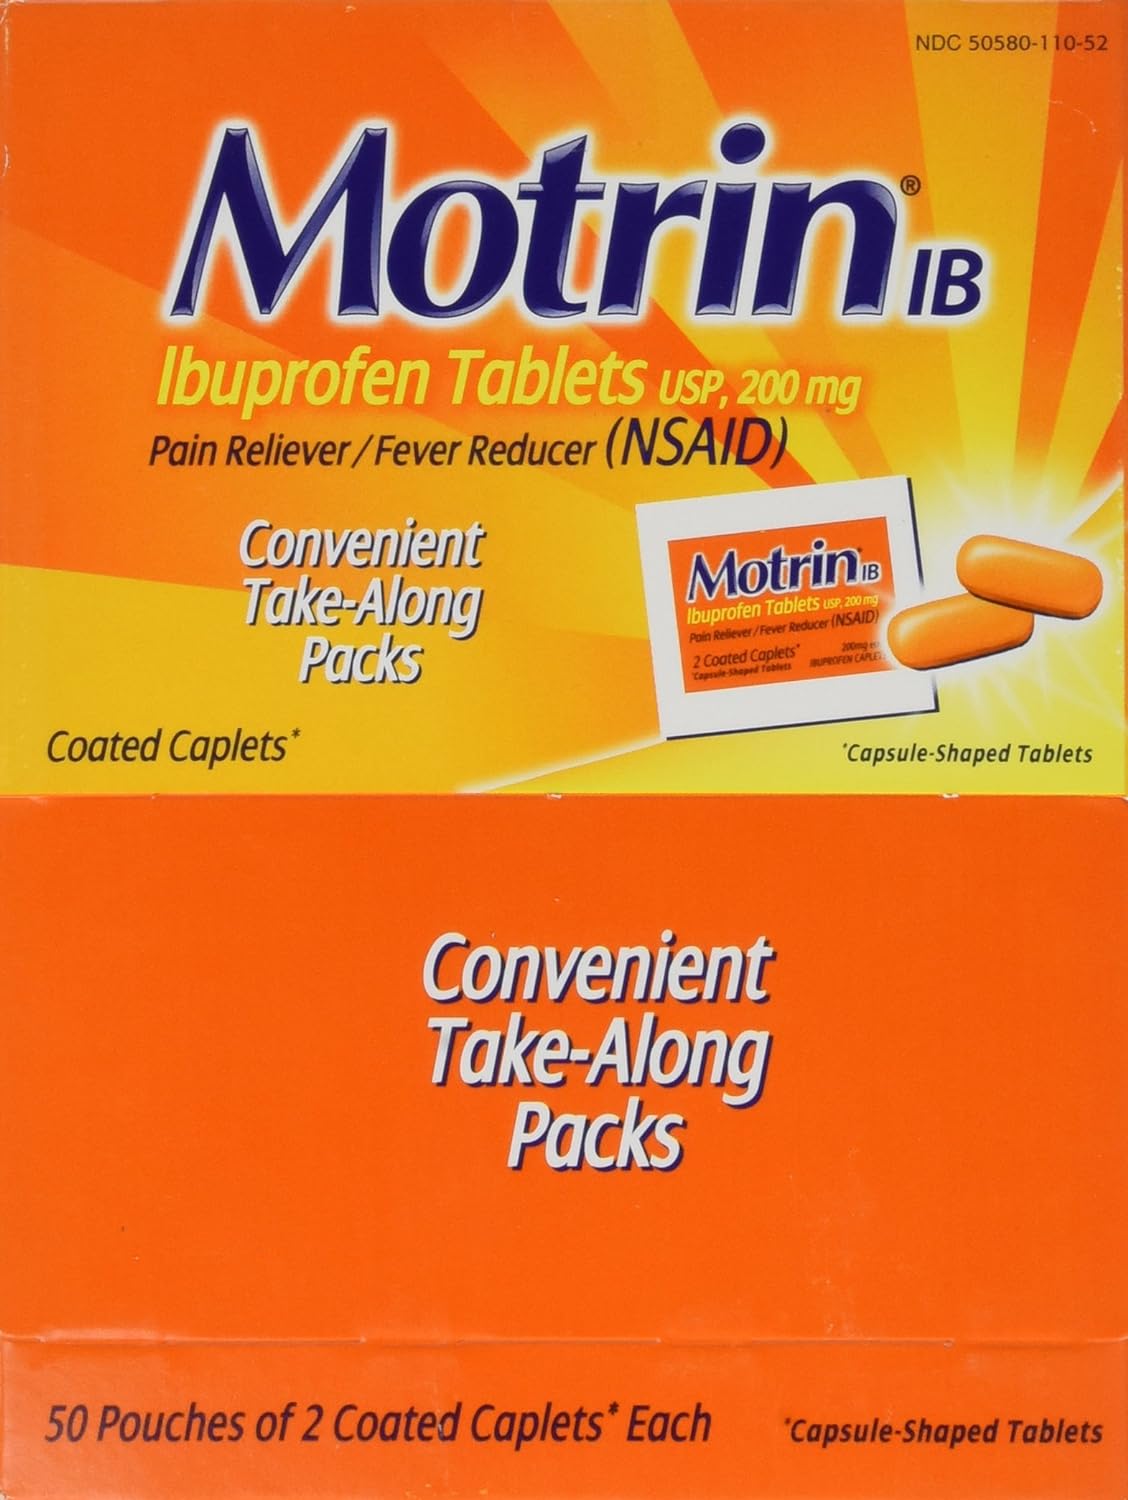 Motrin IB, Ibuprofen 200mg Tablets for Fever, Muscle, Headache & Pain Relief, 50 Count, Pack of 2